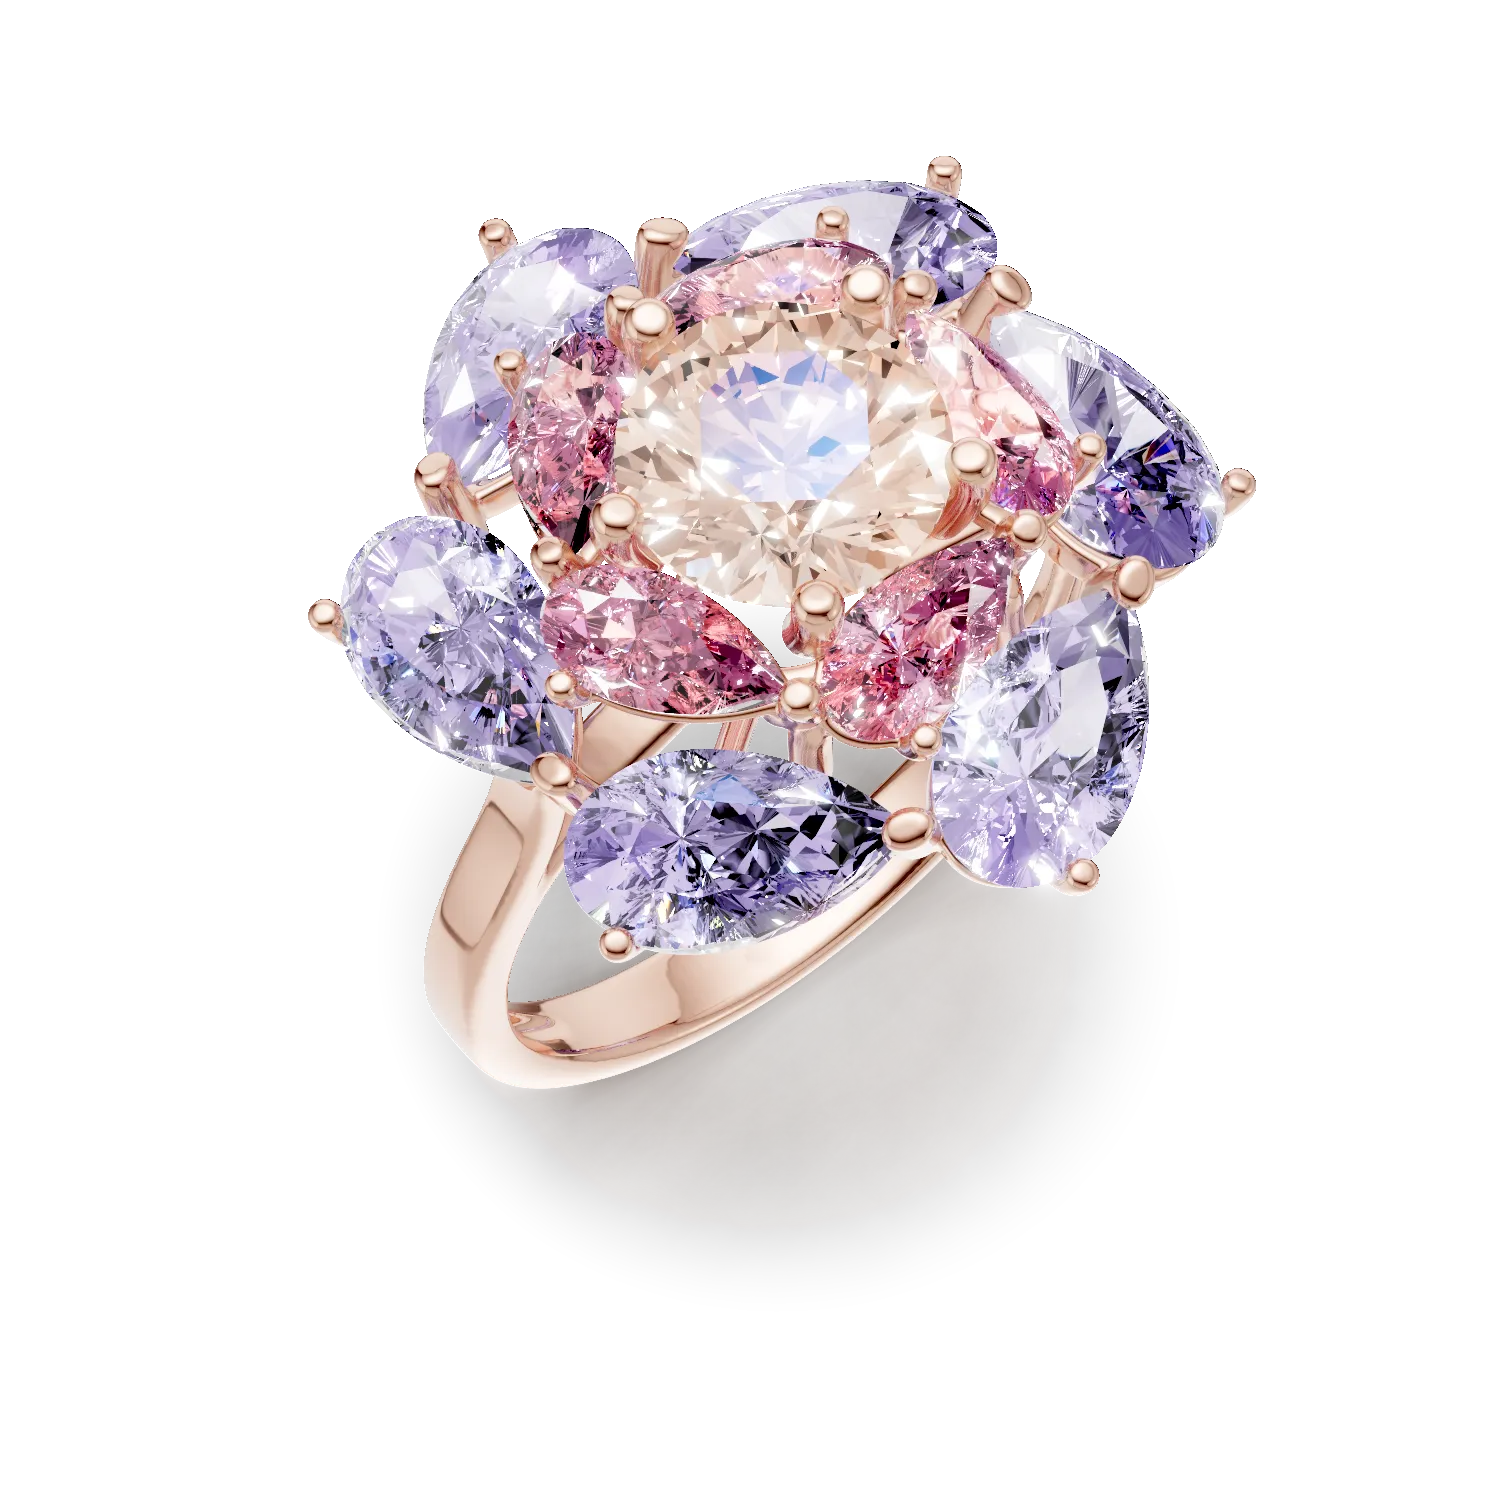 Rose gold flower ring with 5.7ct semi-precious stones